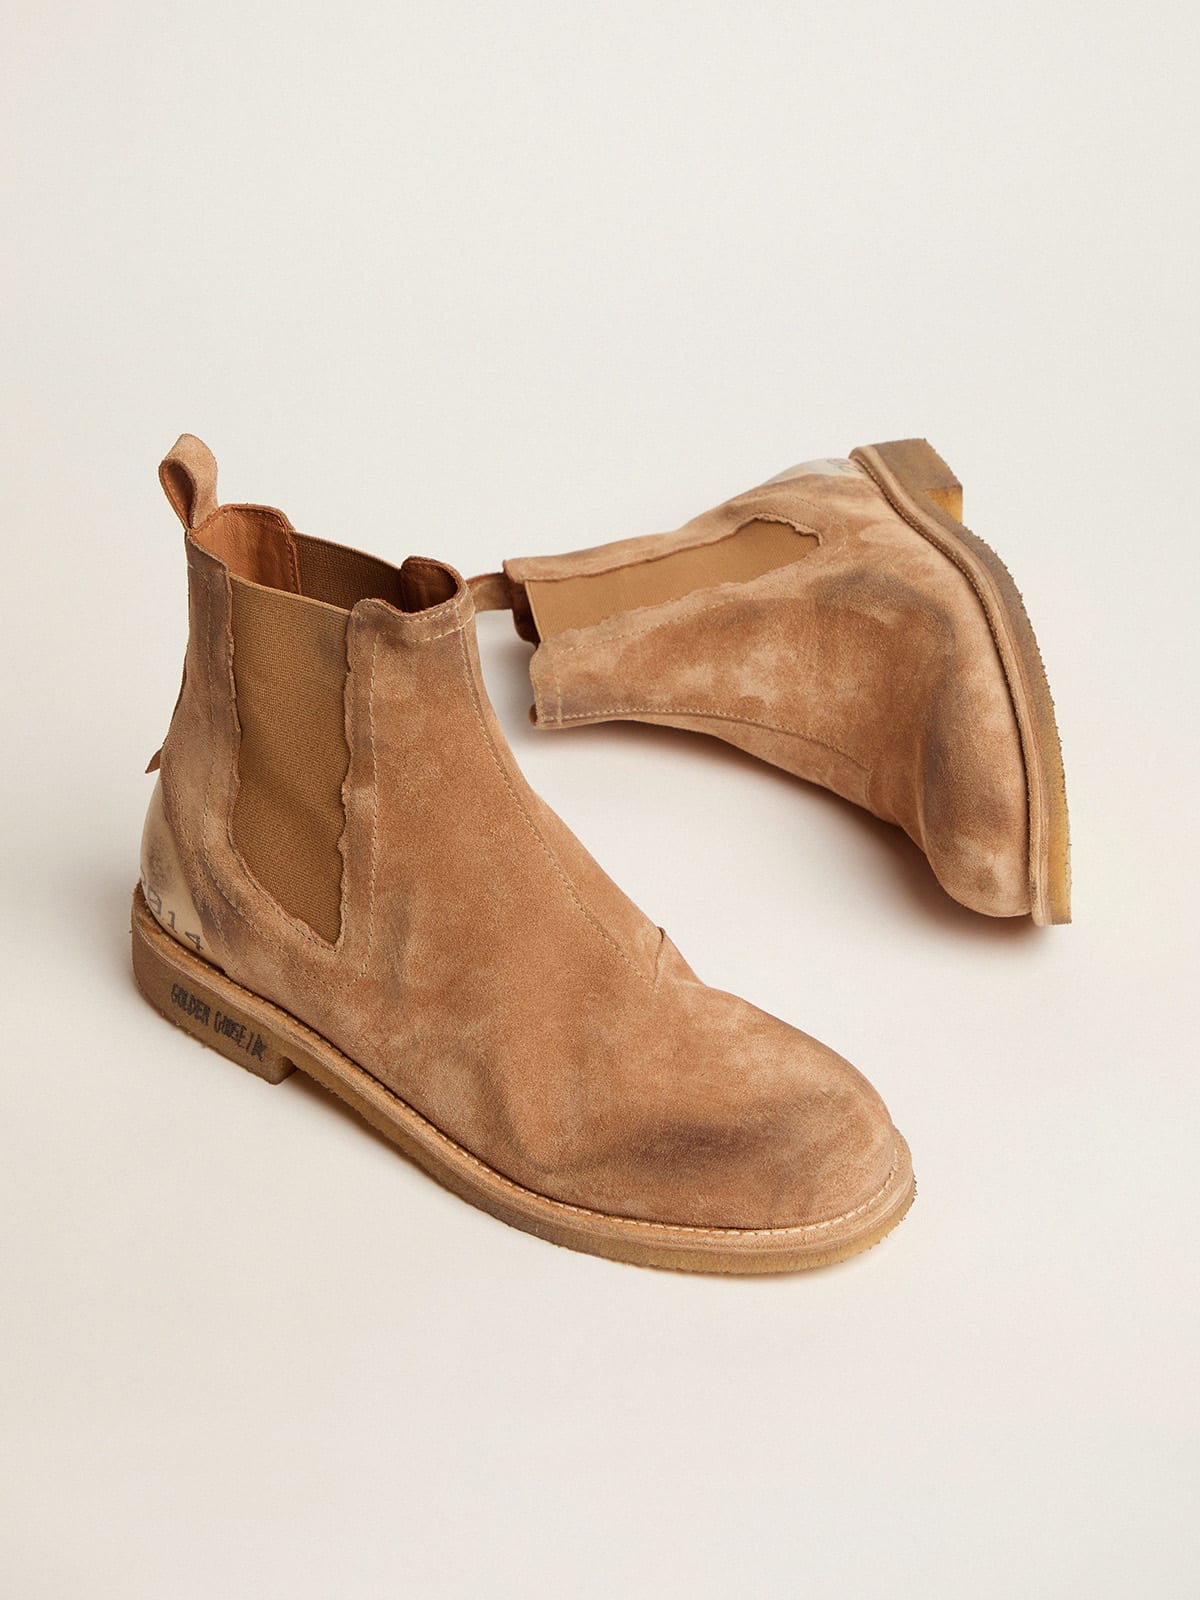 Golden Goose - John Chelsea boots in caramel-colored suede in 